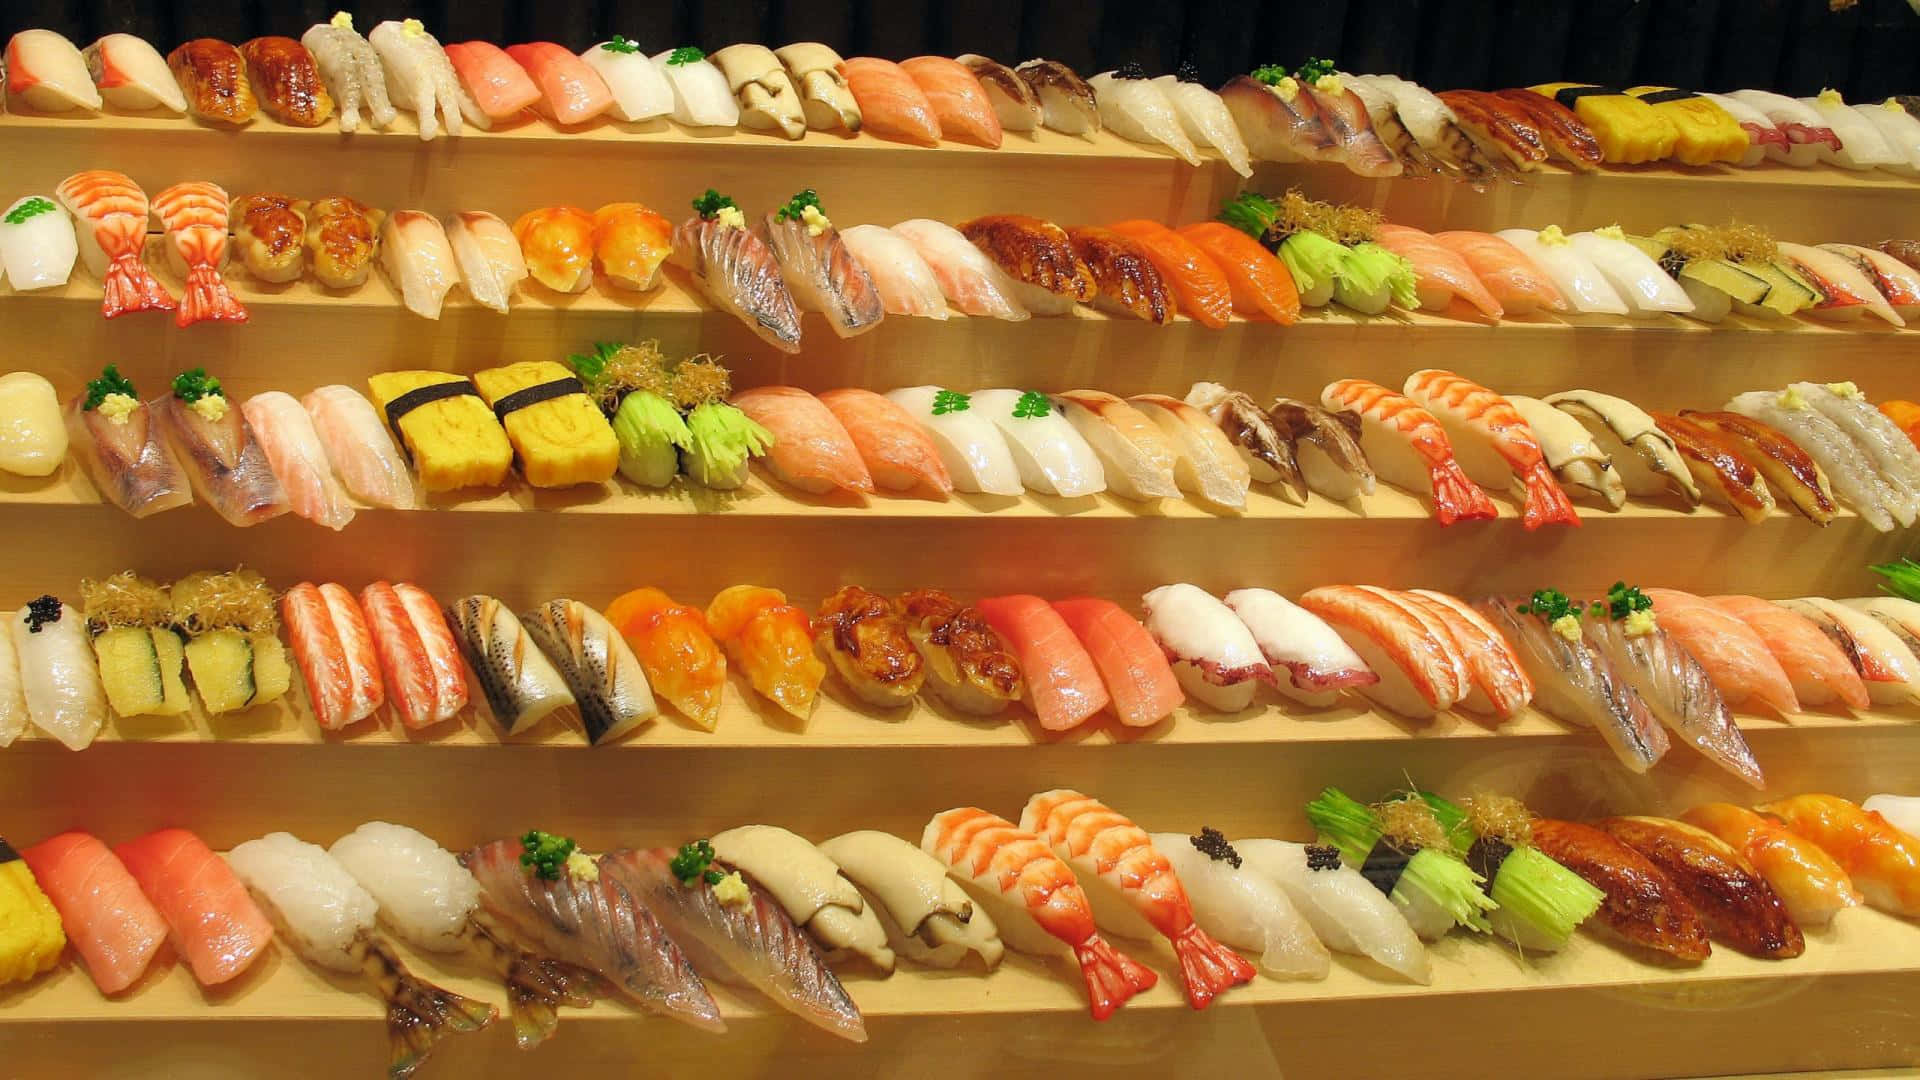 Colorful Feast: Delectable Assortment of Sushi